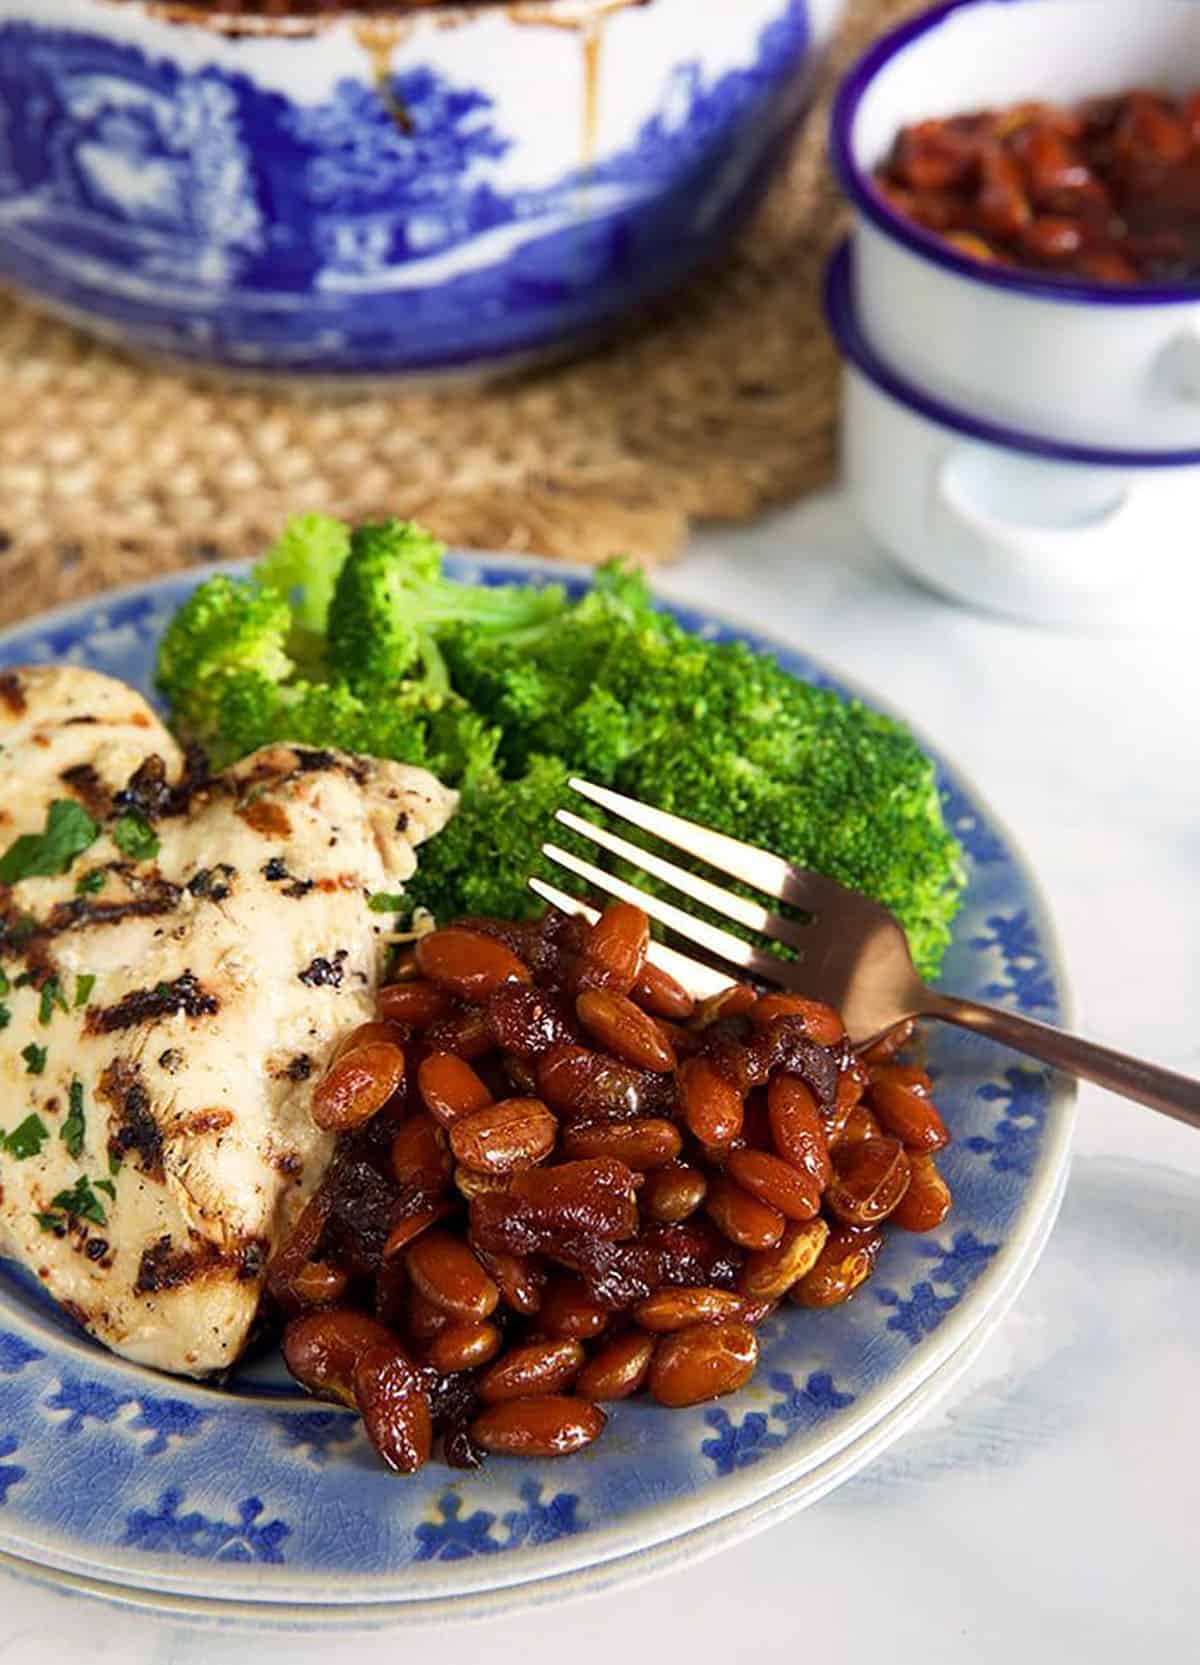 Baked beans on a blue plate with grilled chicken and broccoli.